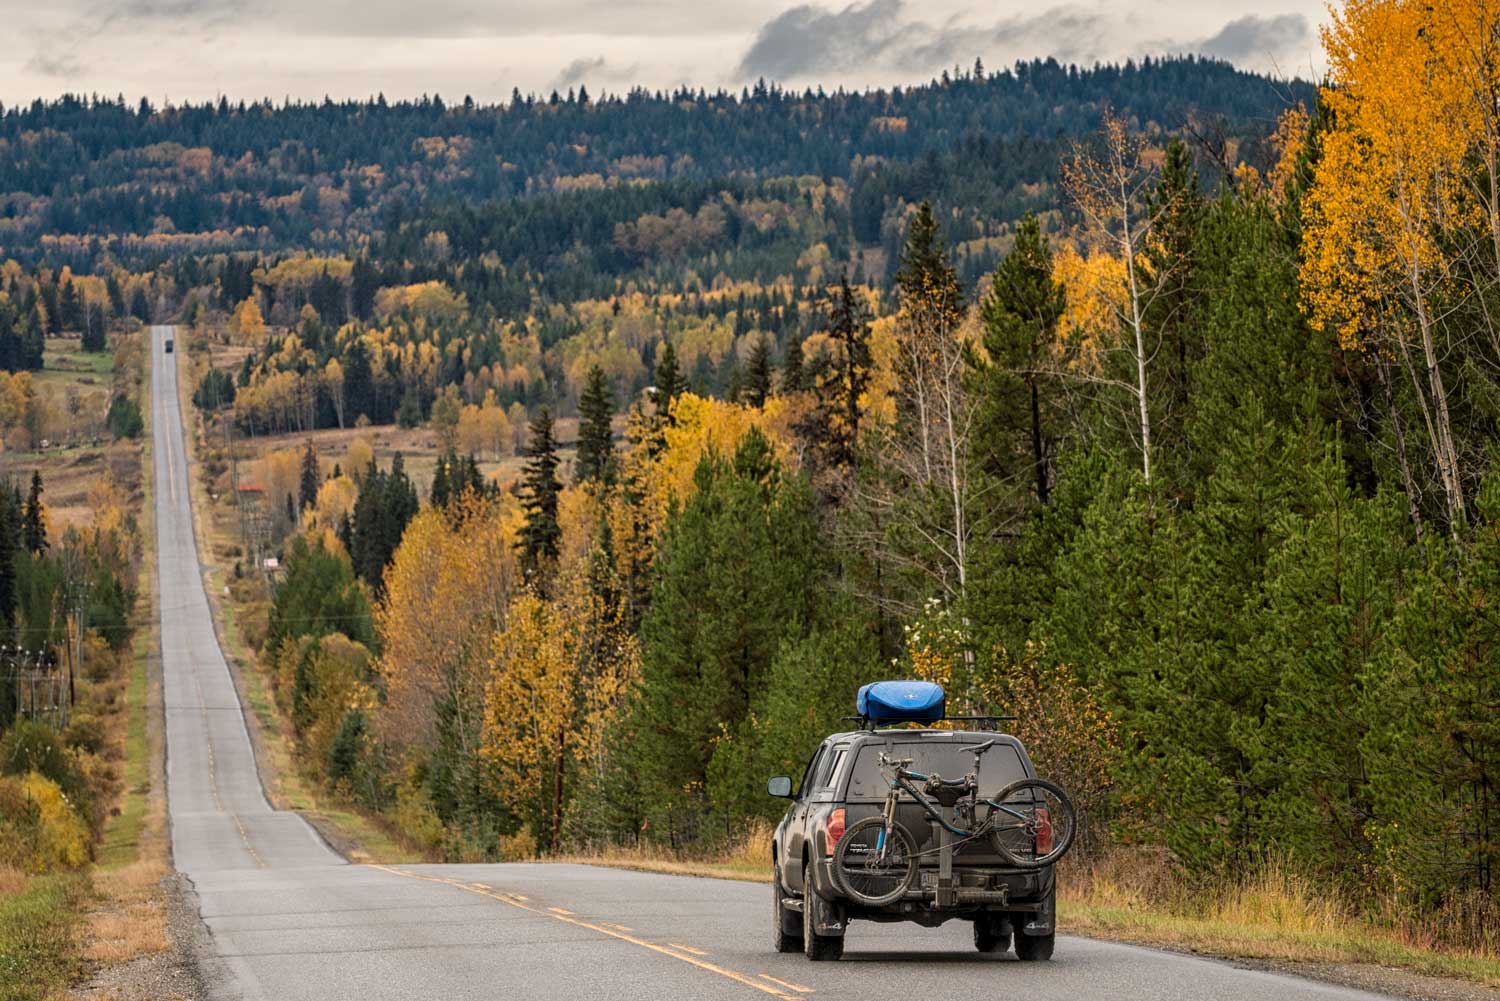 A thousand landscapes: road tripping in British Columbia